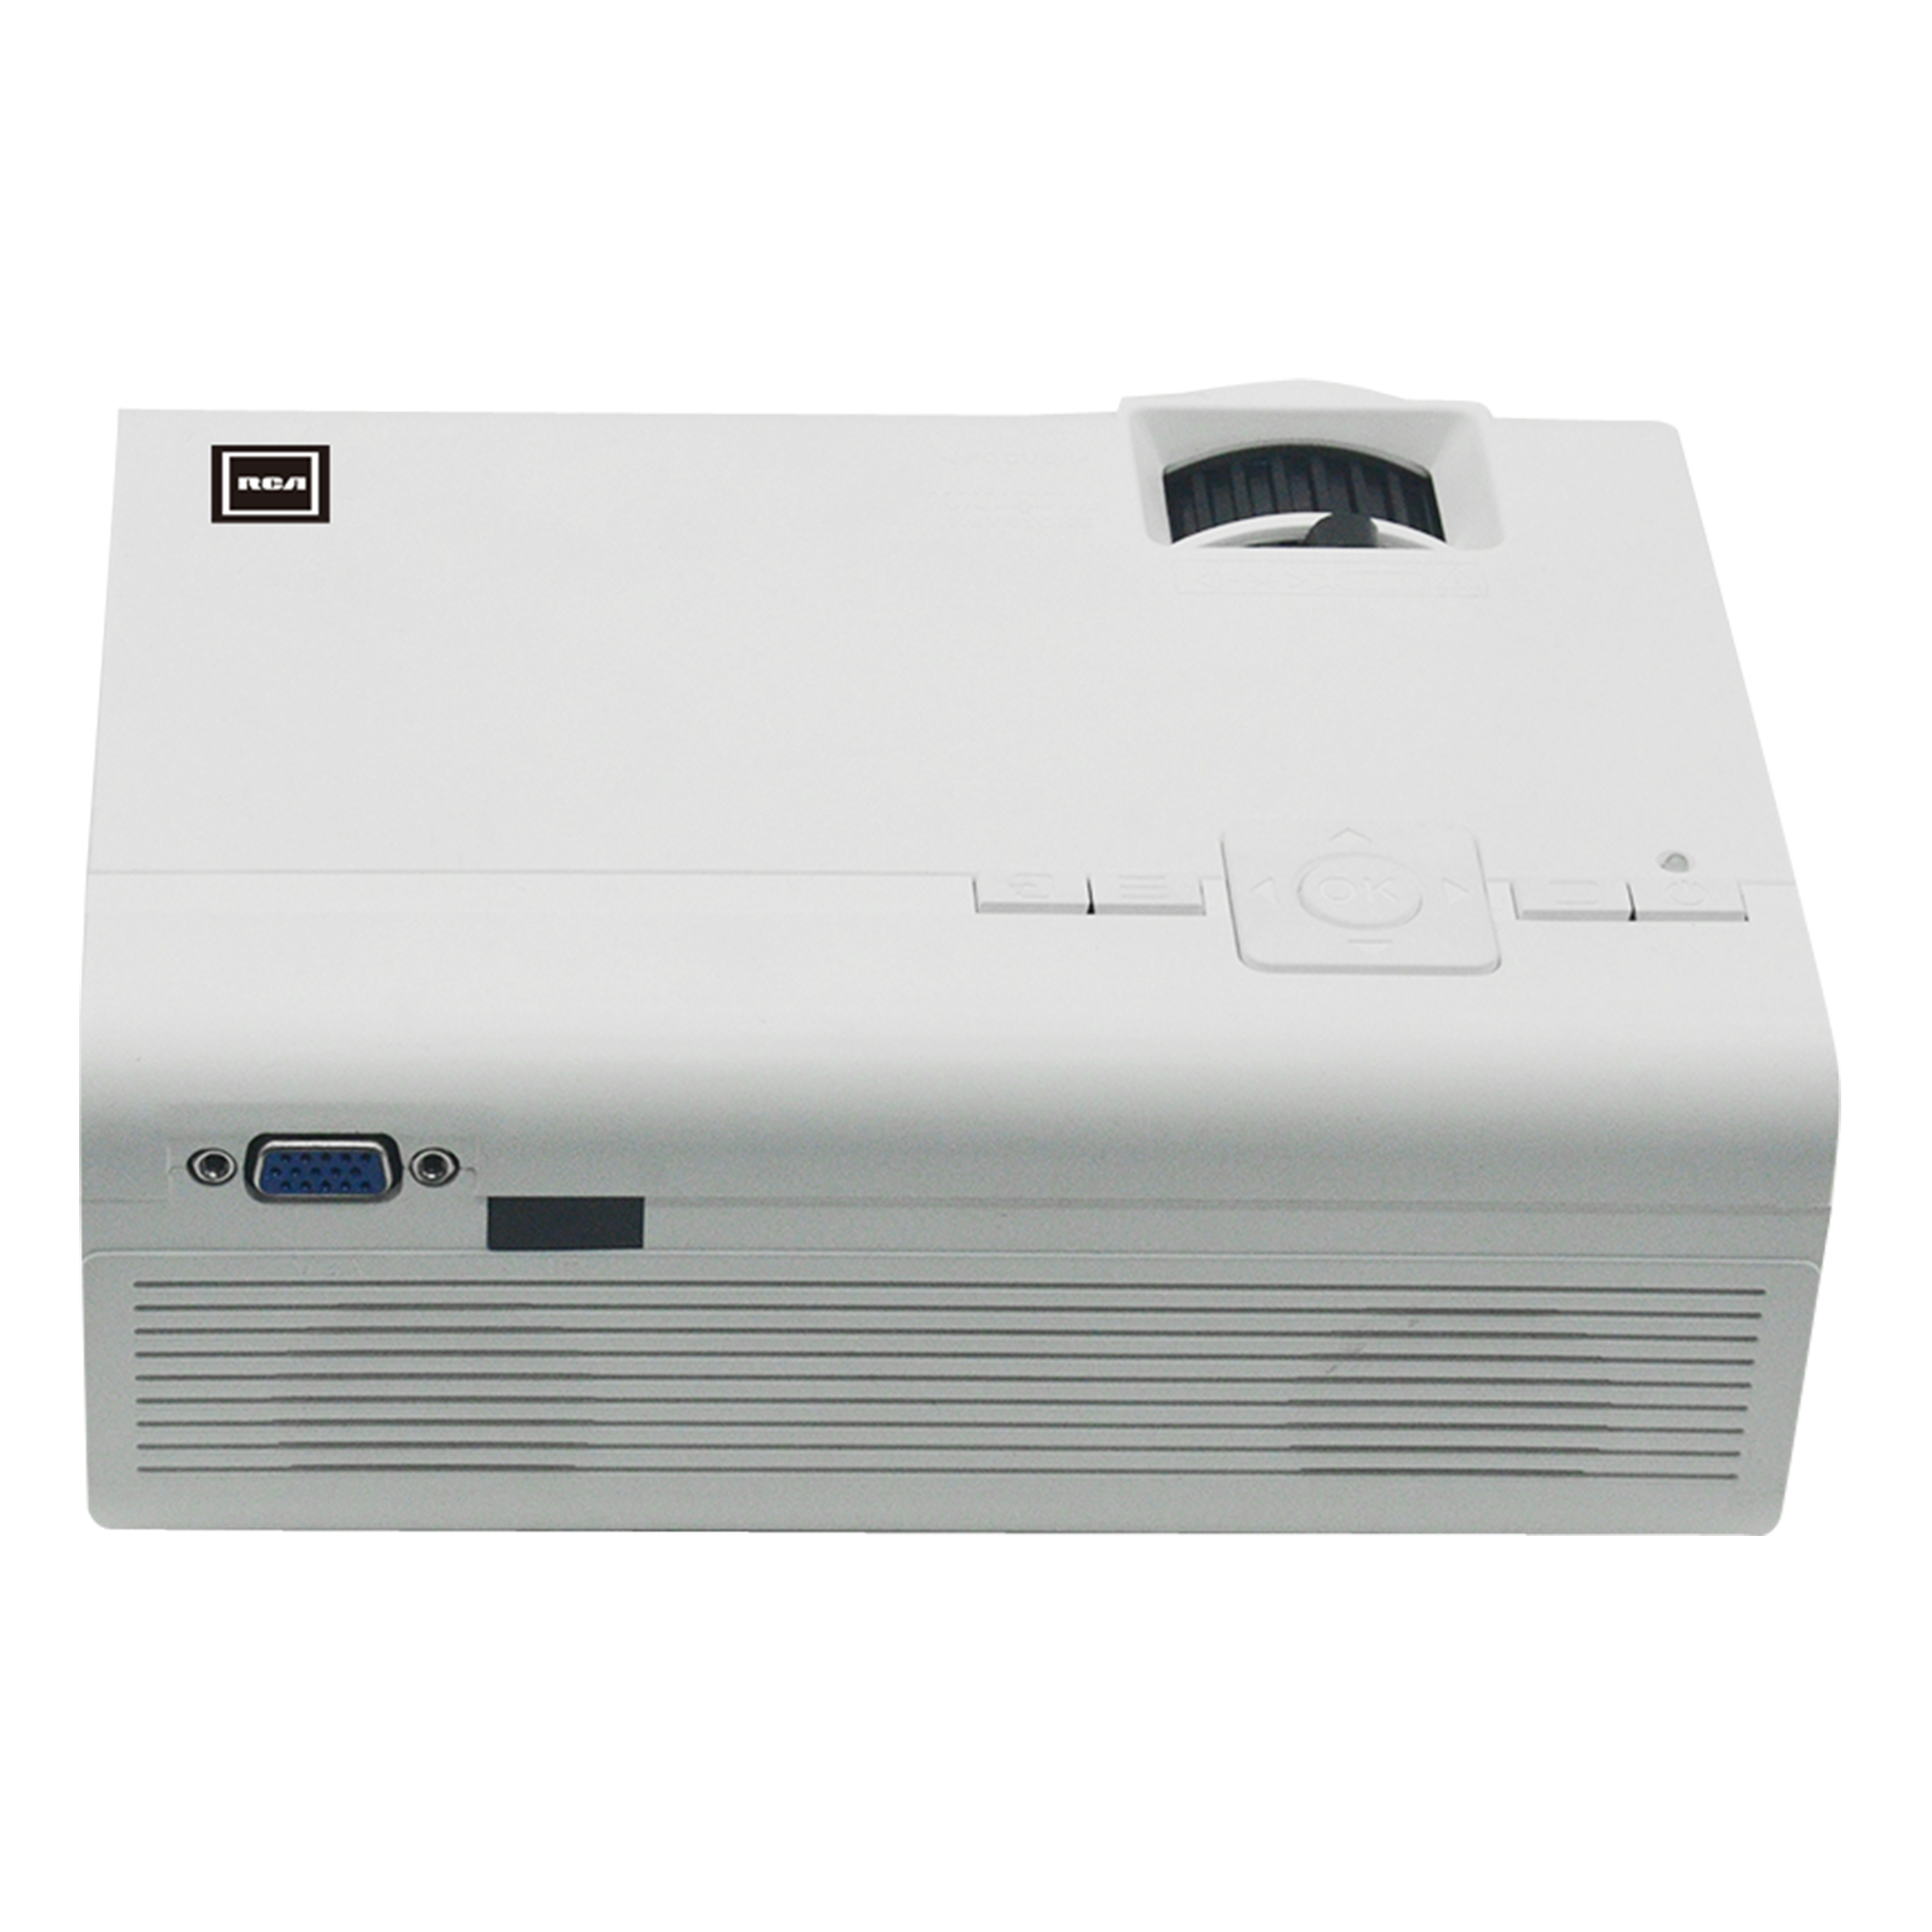 RCA 480P LCD Home Theater Projector - Up to 130" RPJ136, 1.5 LB, White - image 5 of 16